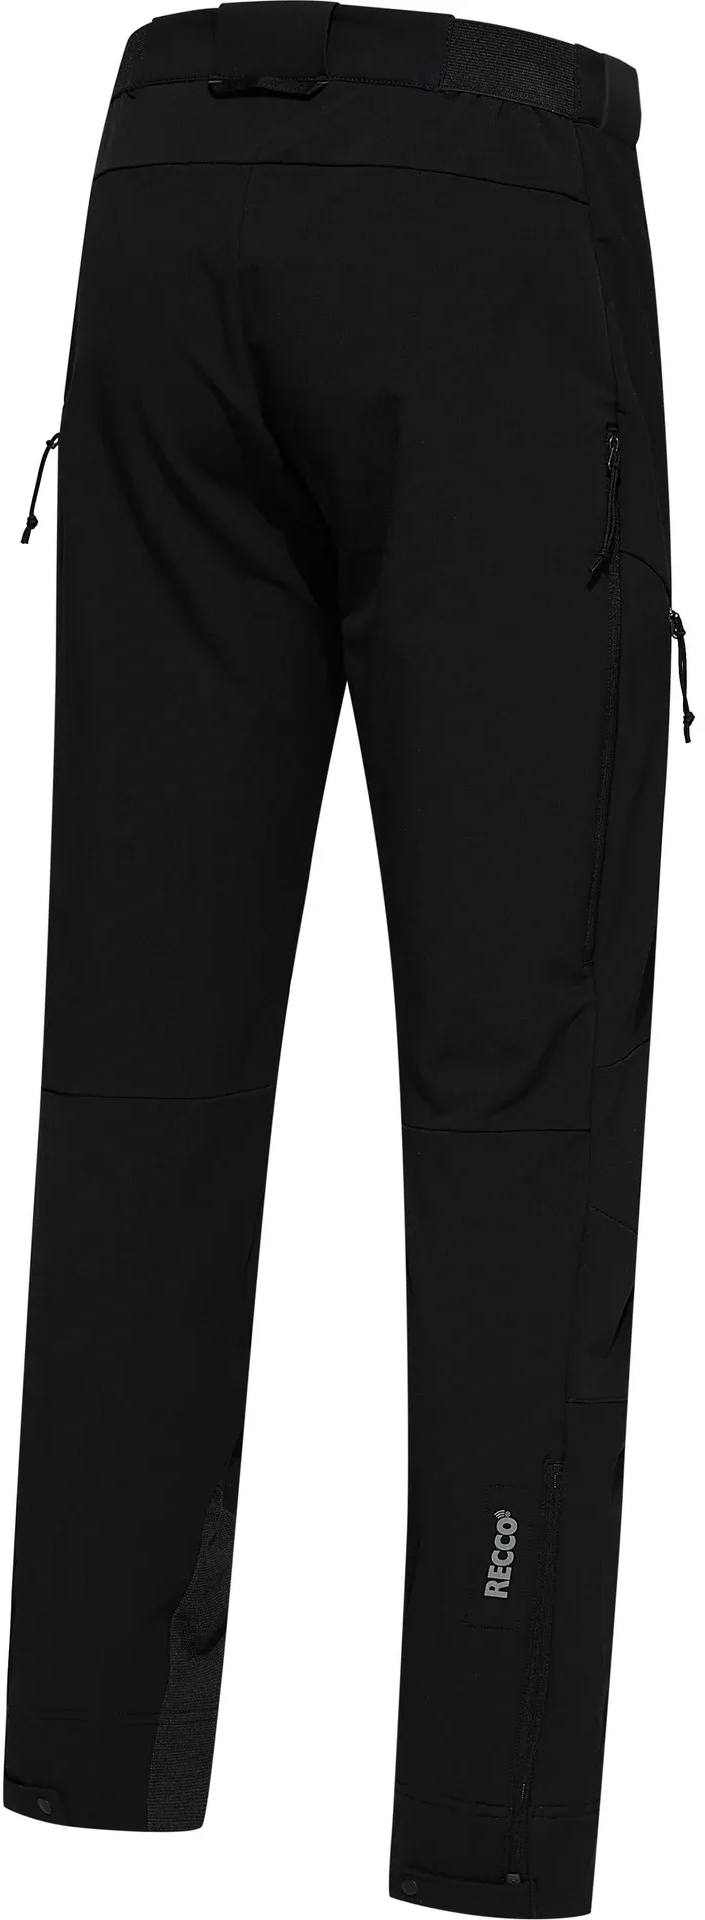 Women’s Discover Touring Pant Black 42